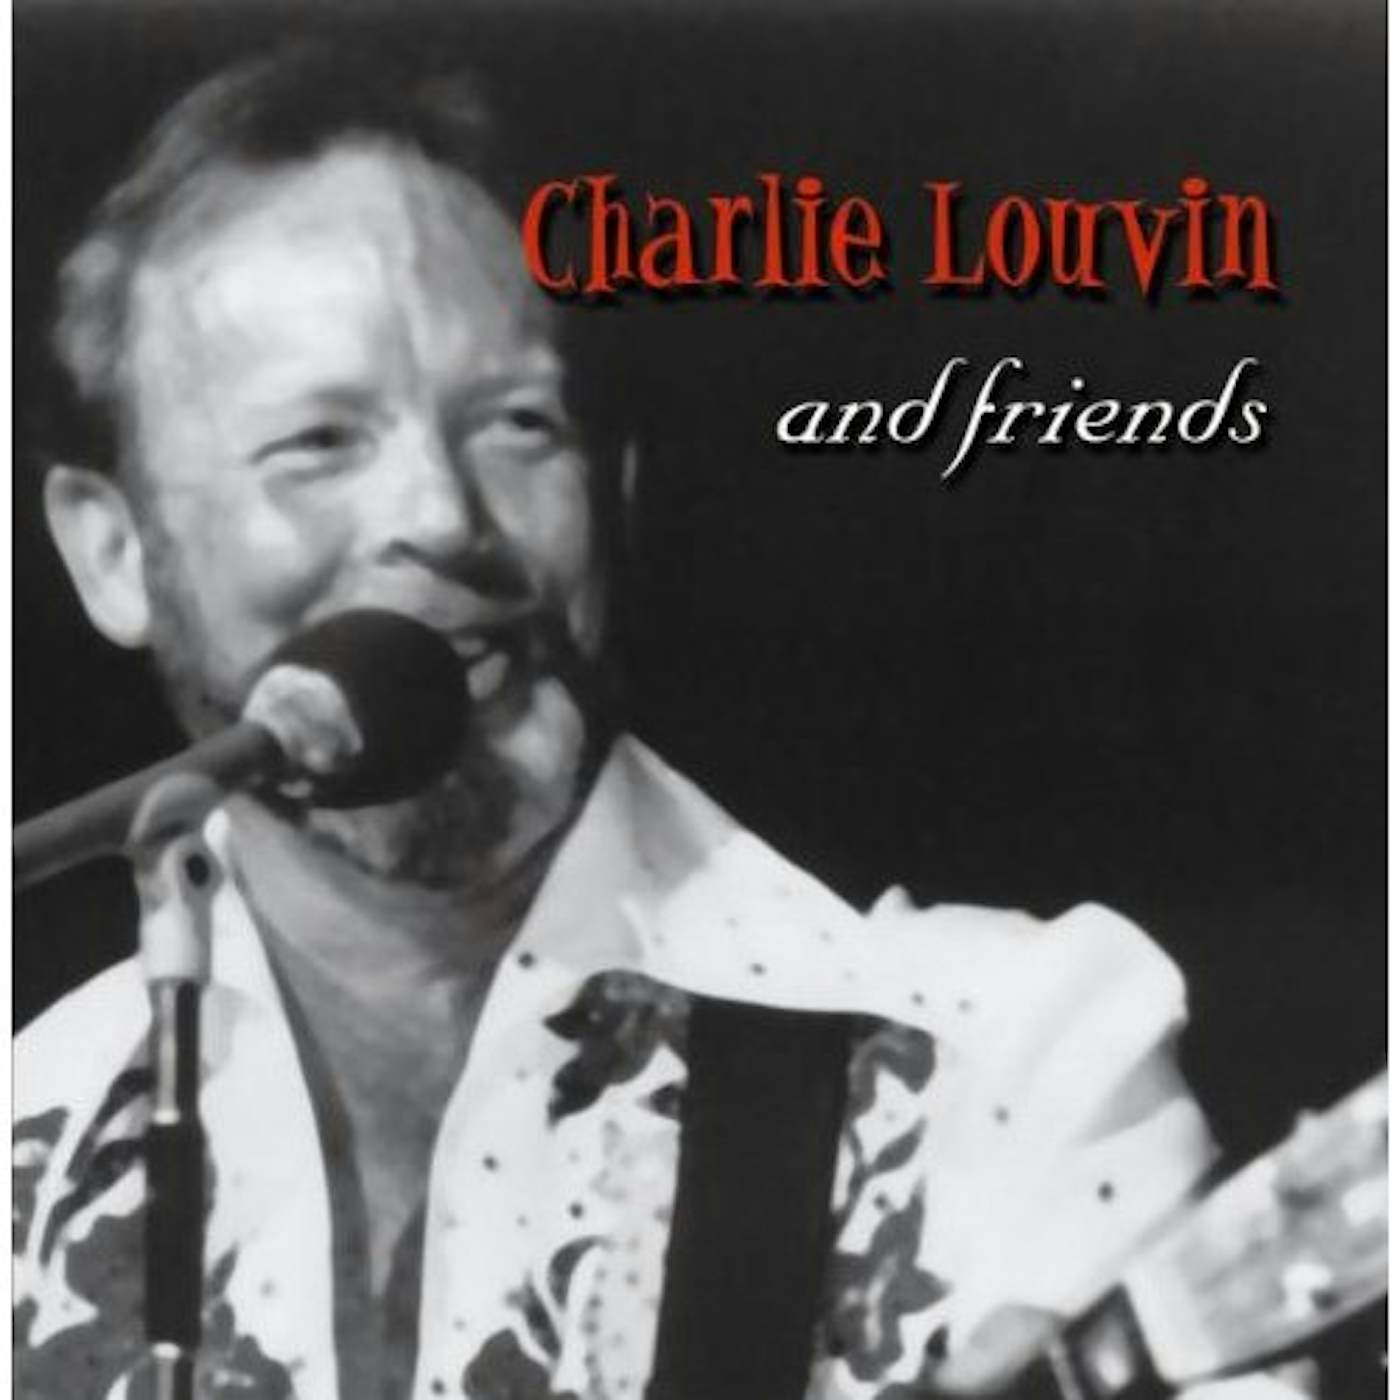 Charlie Louvin AND FRIENDS CD